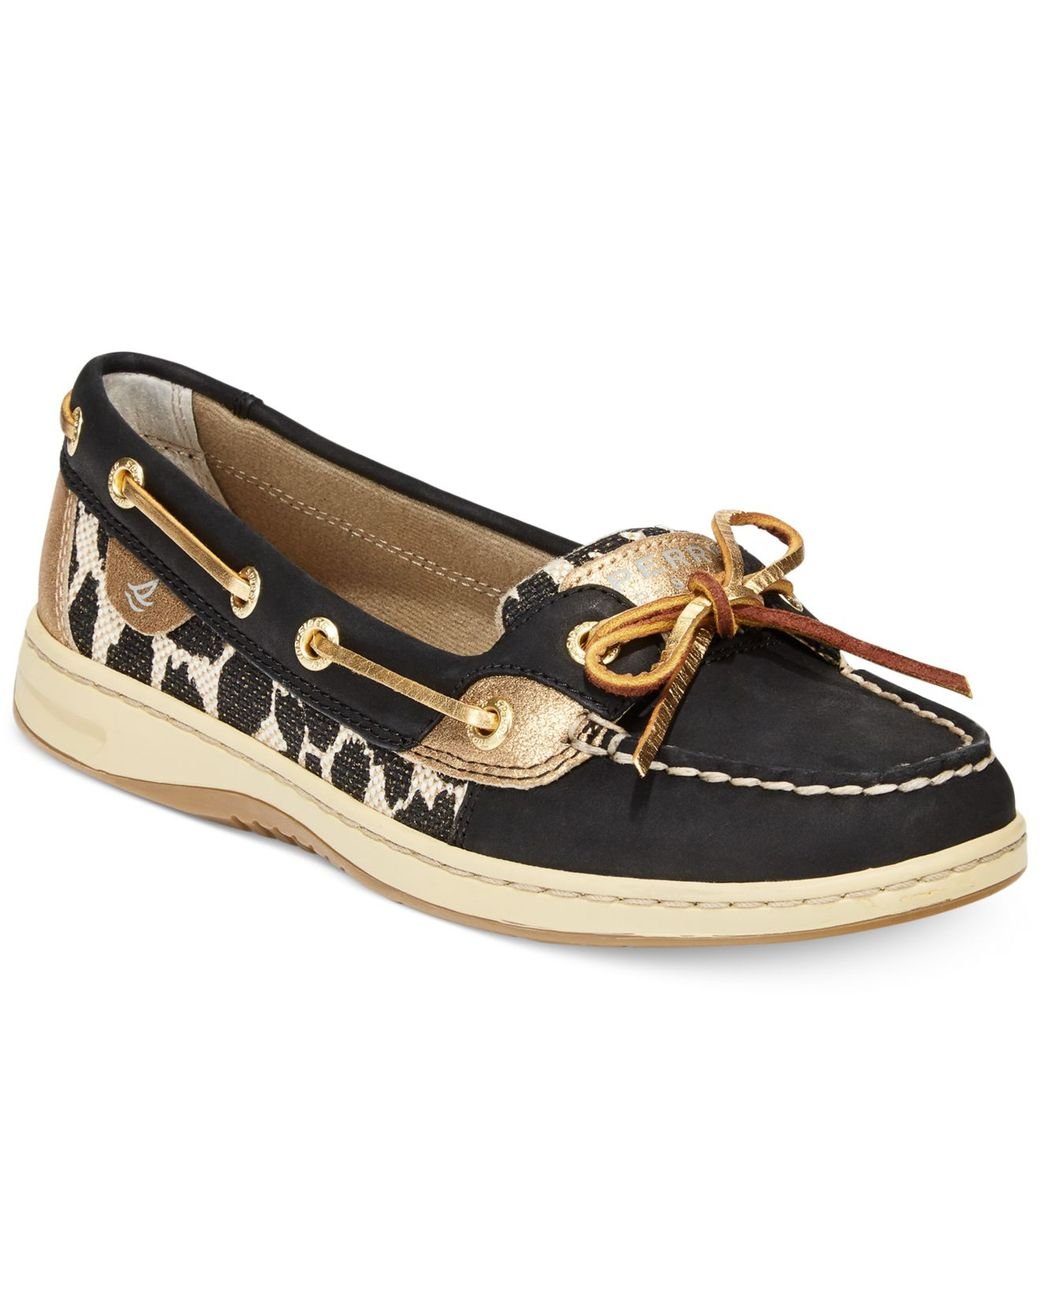 Sperry Top-Sider Sperry Women'S Angelfish Leopard Boat Shoes in Black | Lyst